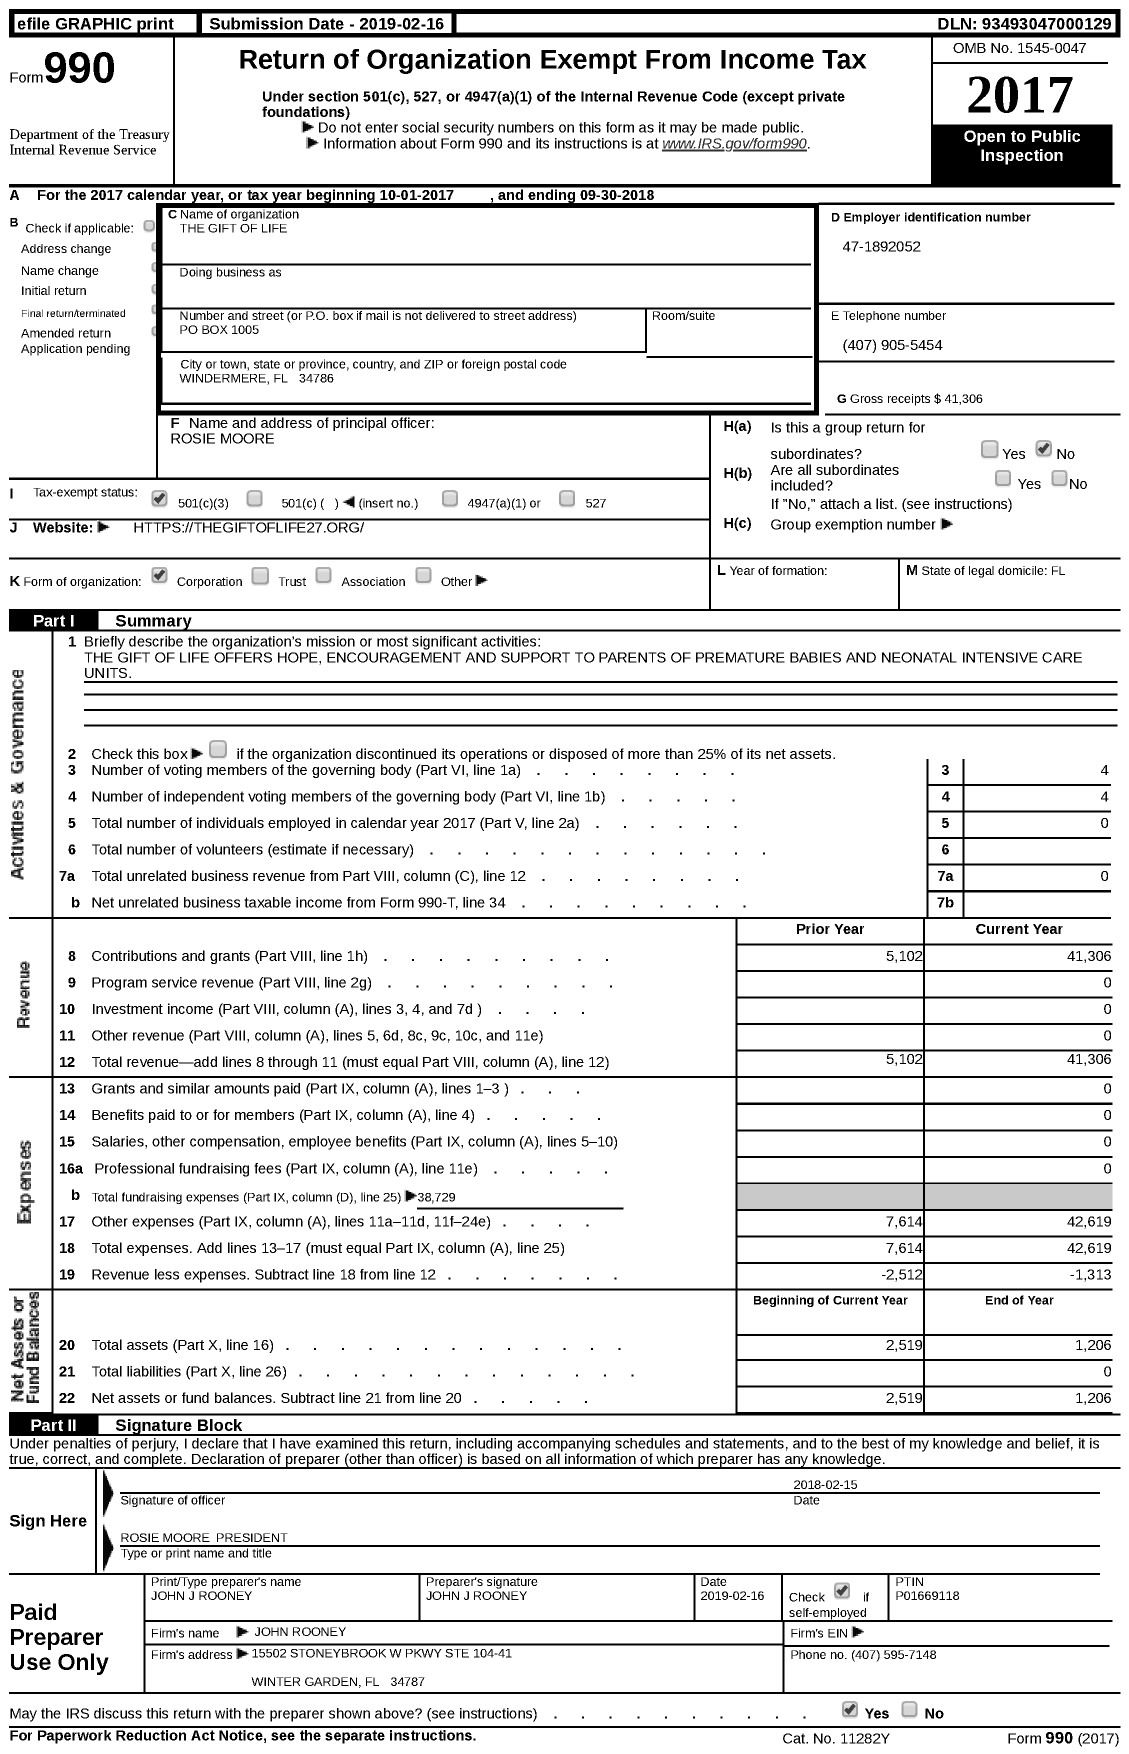 Image of first page of 2017 Form 990 for The Gift of Life Corporation